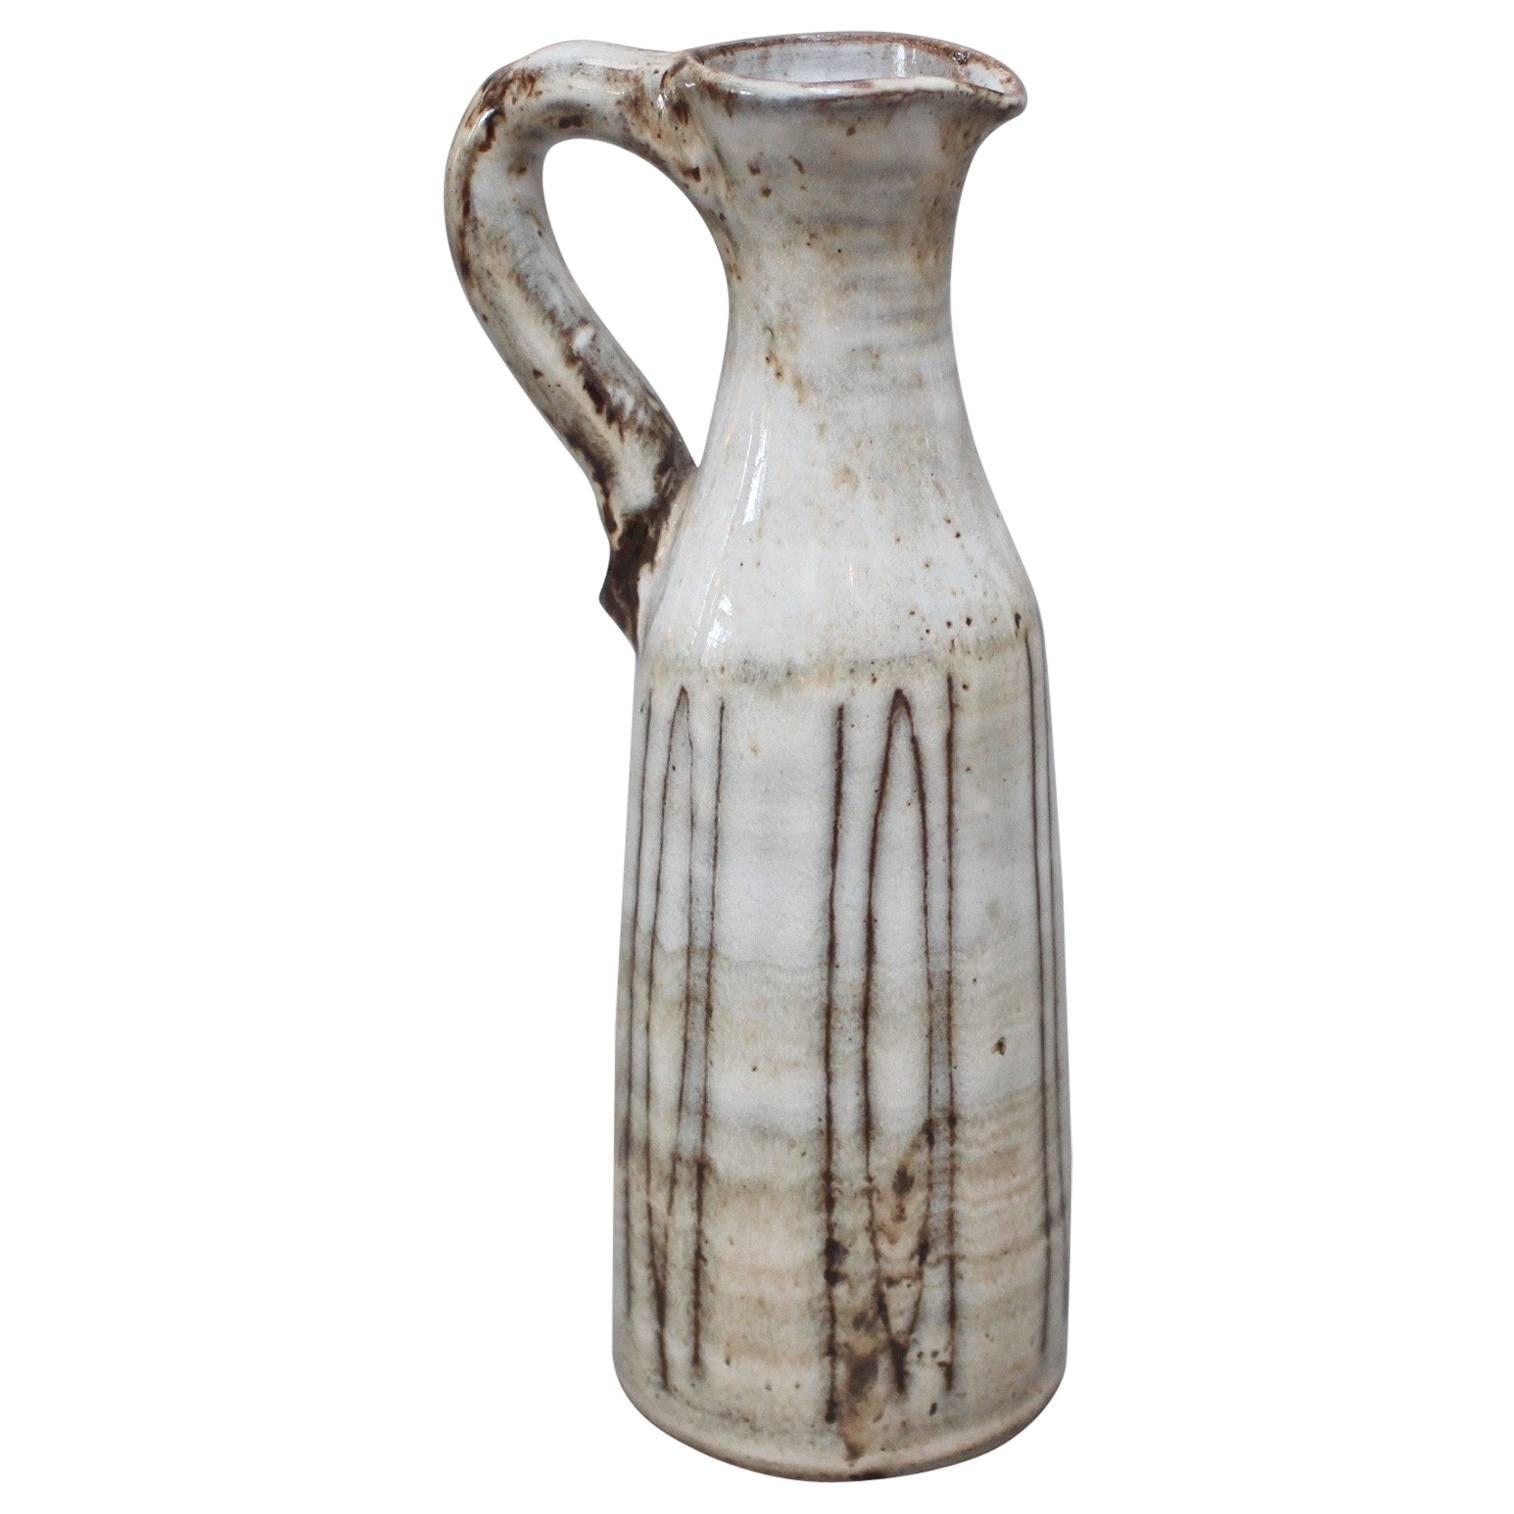 Small Ceramic Jug with Handle by Jacques Pouchain, circa 1960s